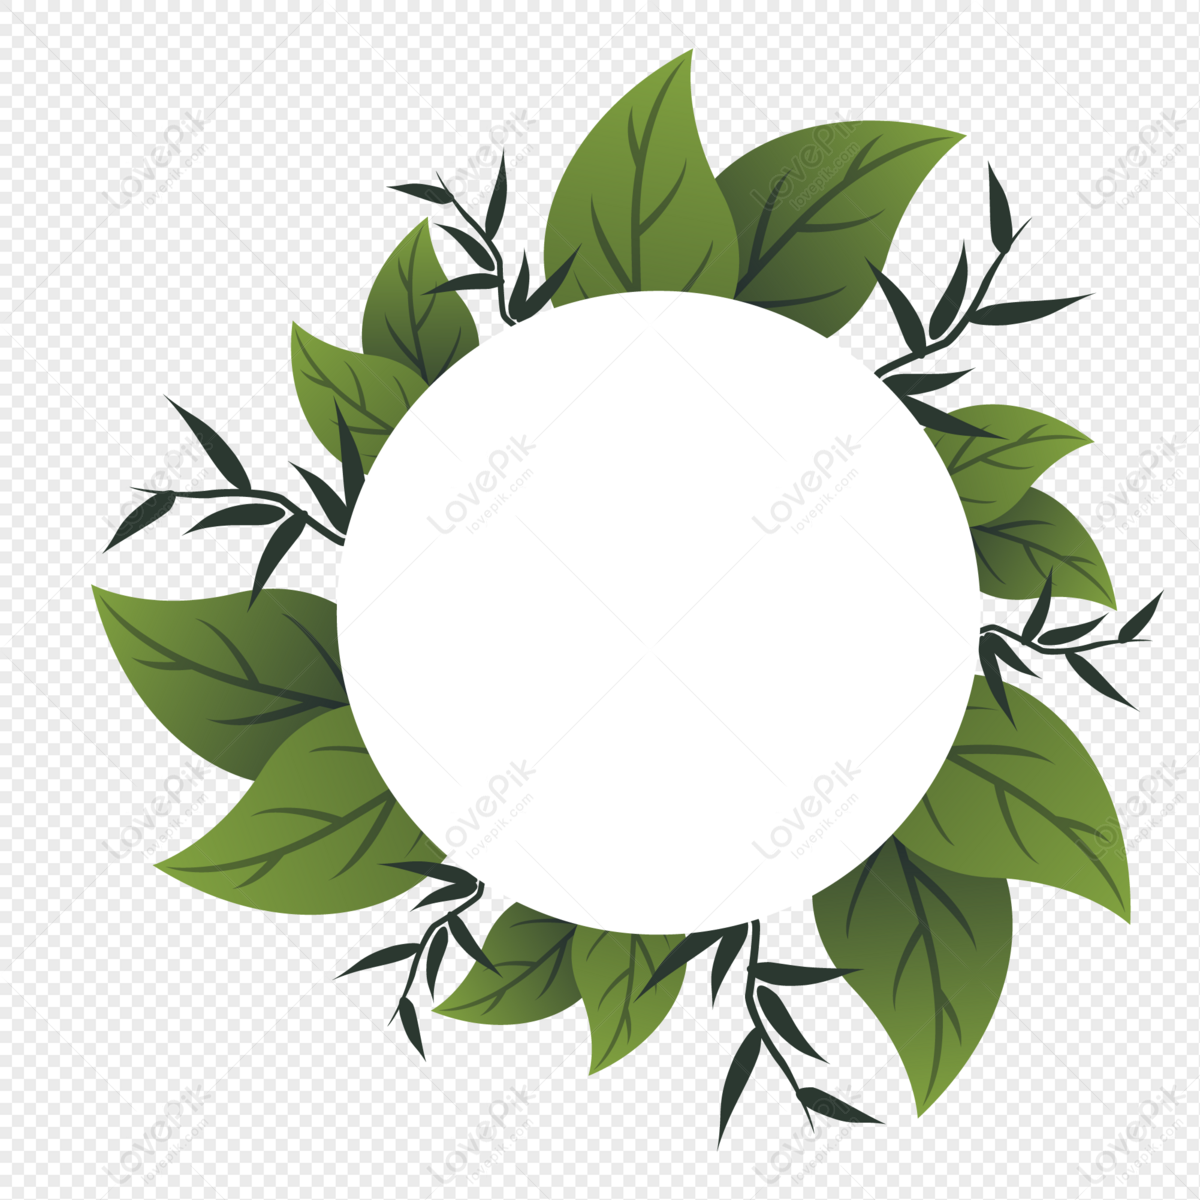 Green Plant Border PNG White Transparent And Clipart Image For Free ...